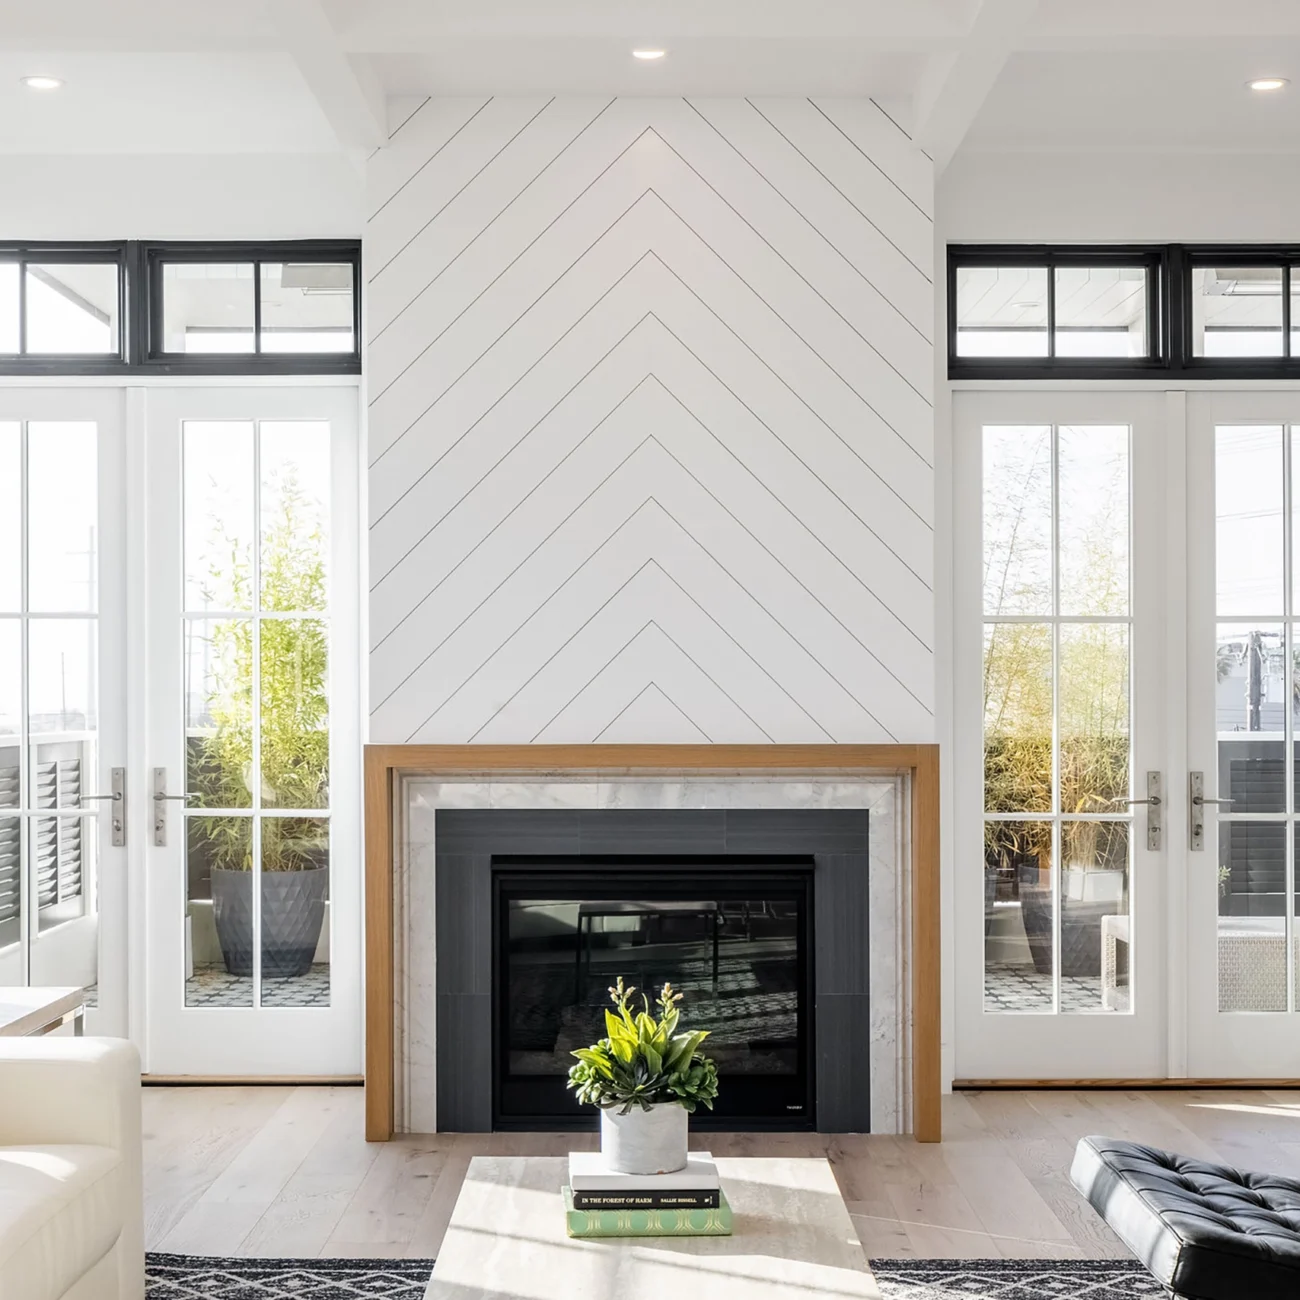 Christine Vroom Interiors | 36th | Costal, bright, white, living room with black accents and fireplace